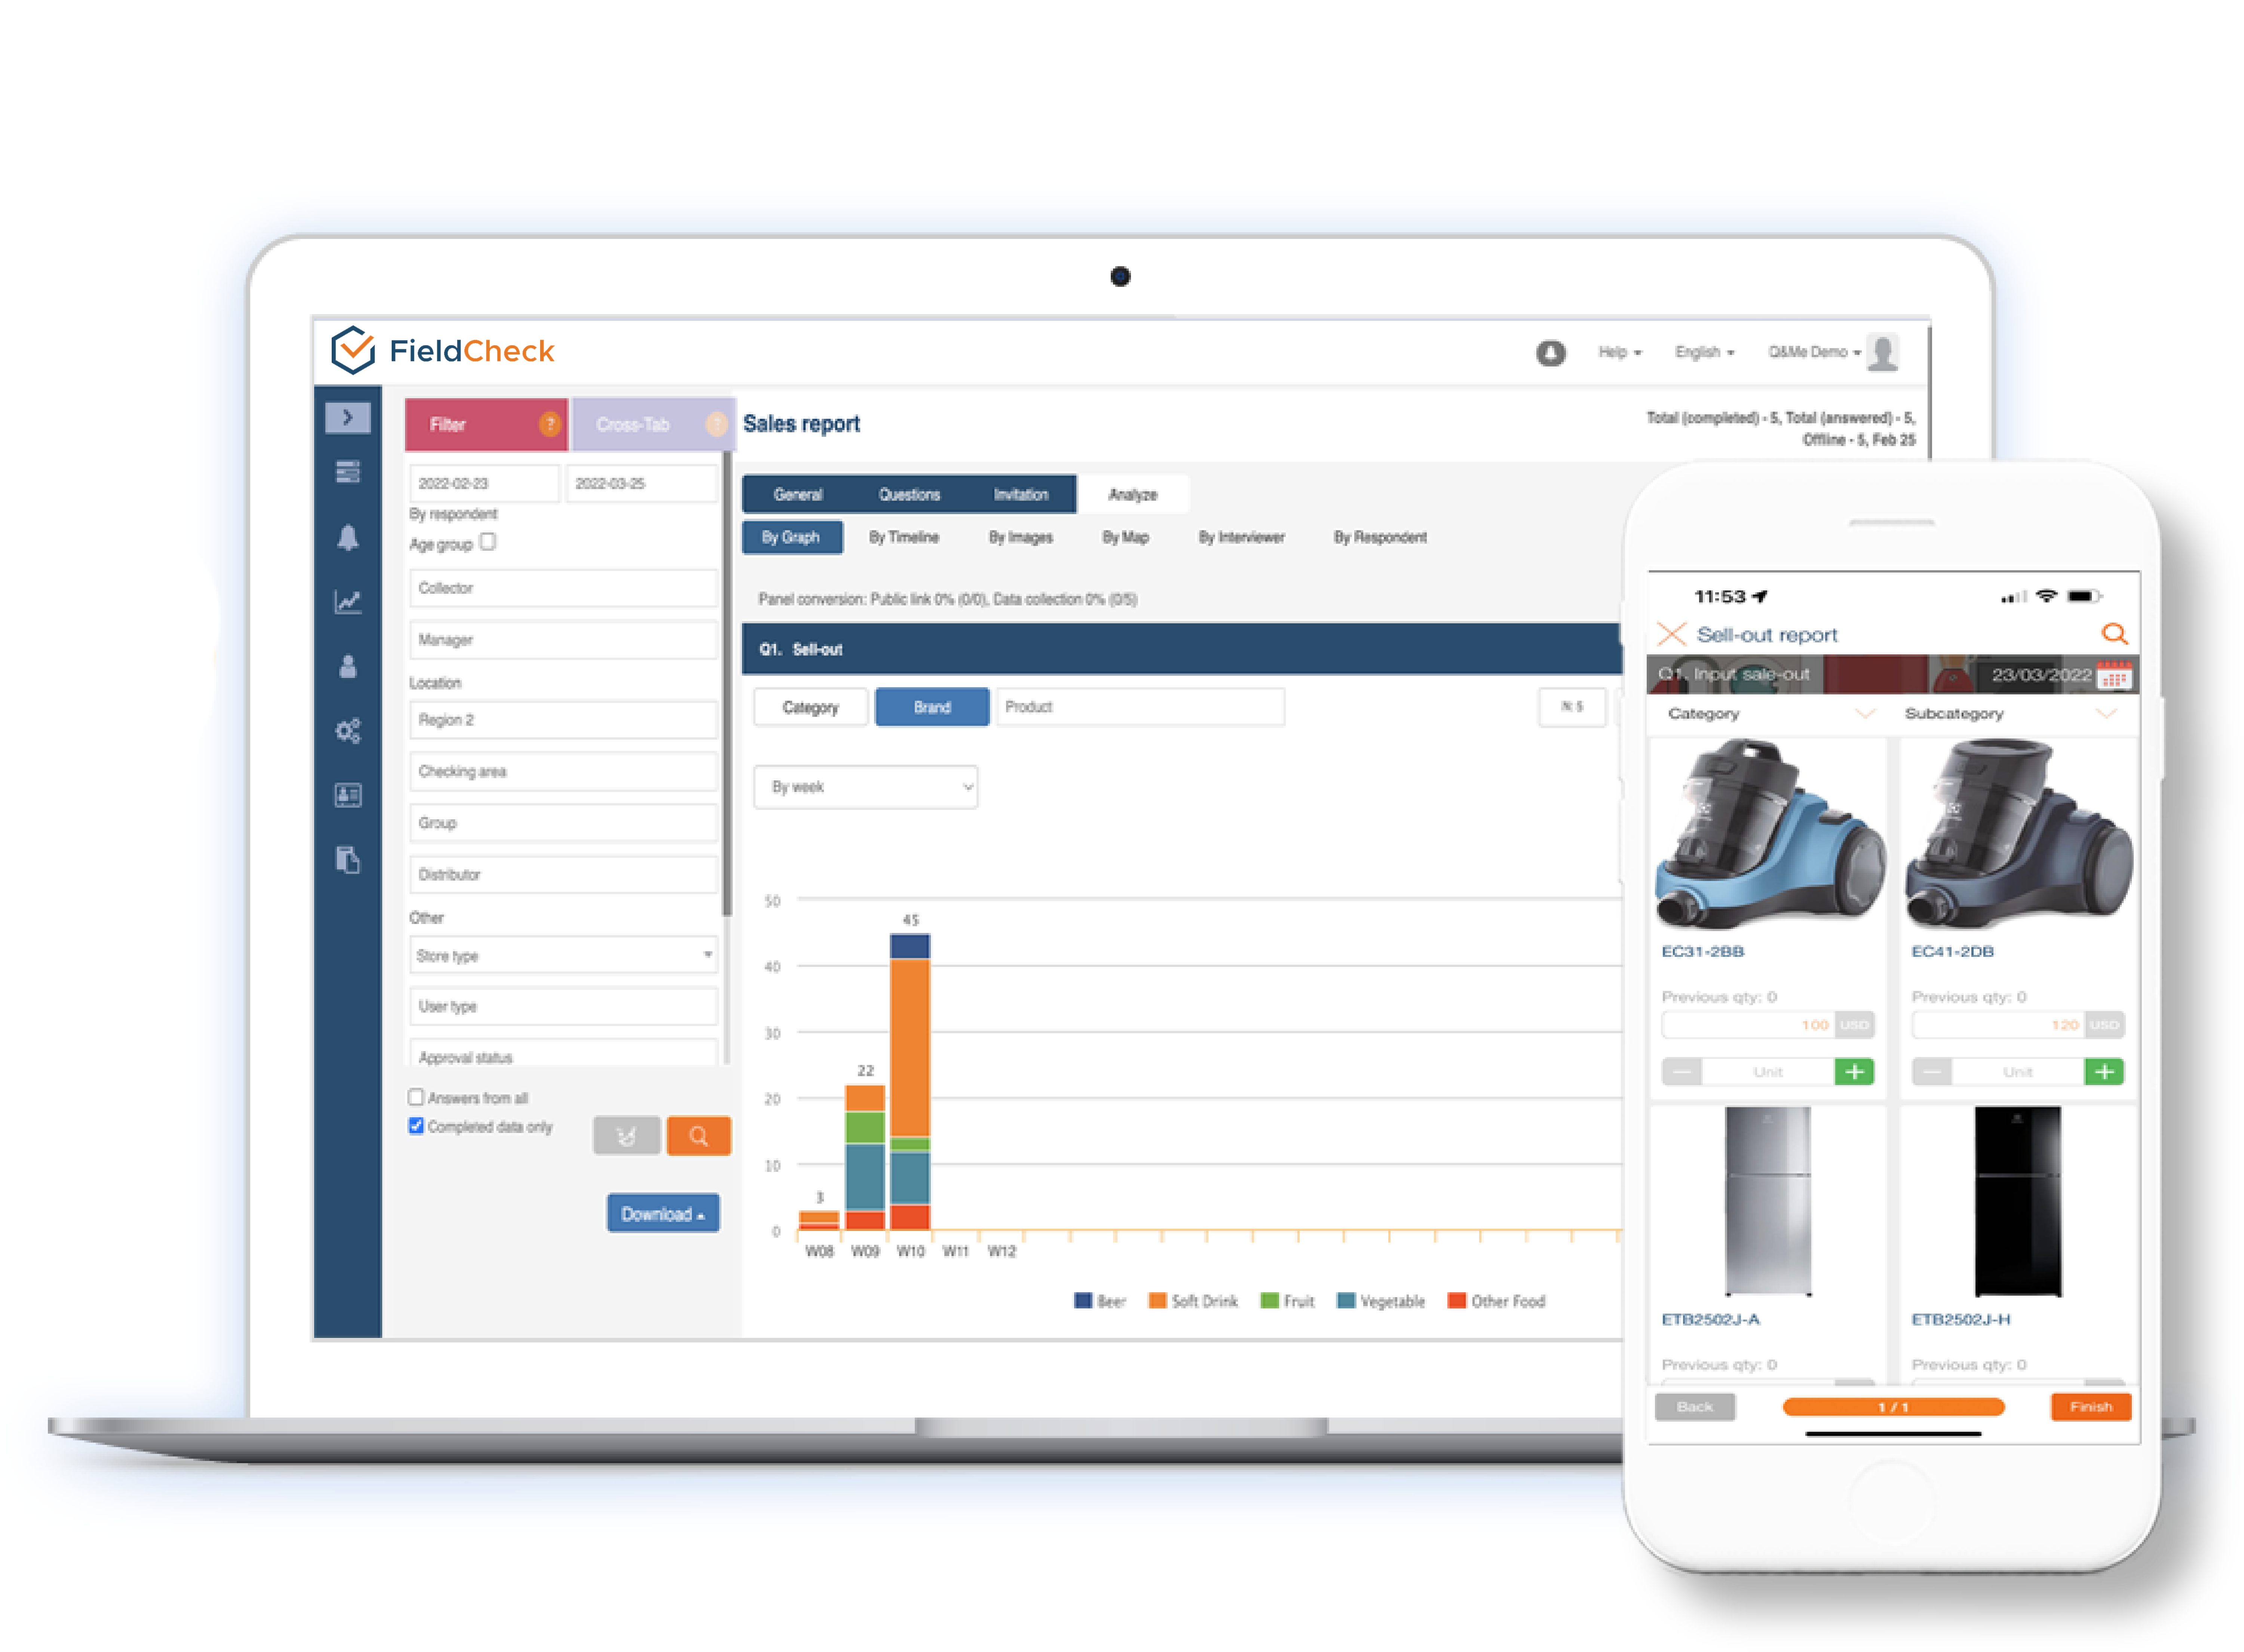 Supports easy metrics reporting and provides in-depth real-time analytics that work online and offline